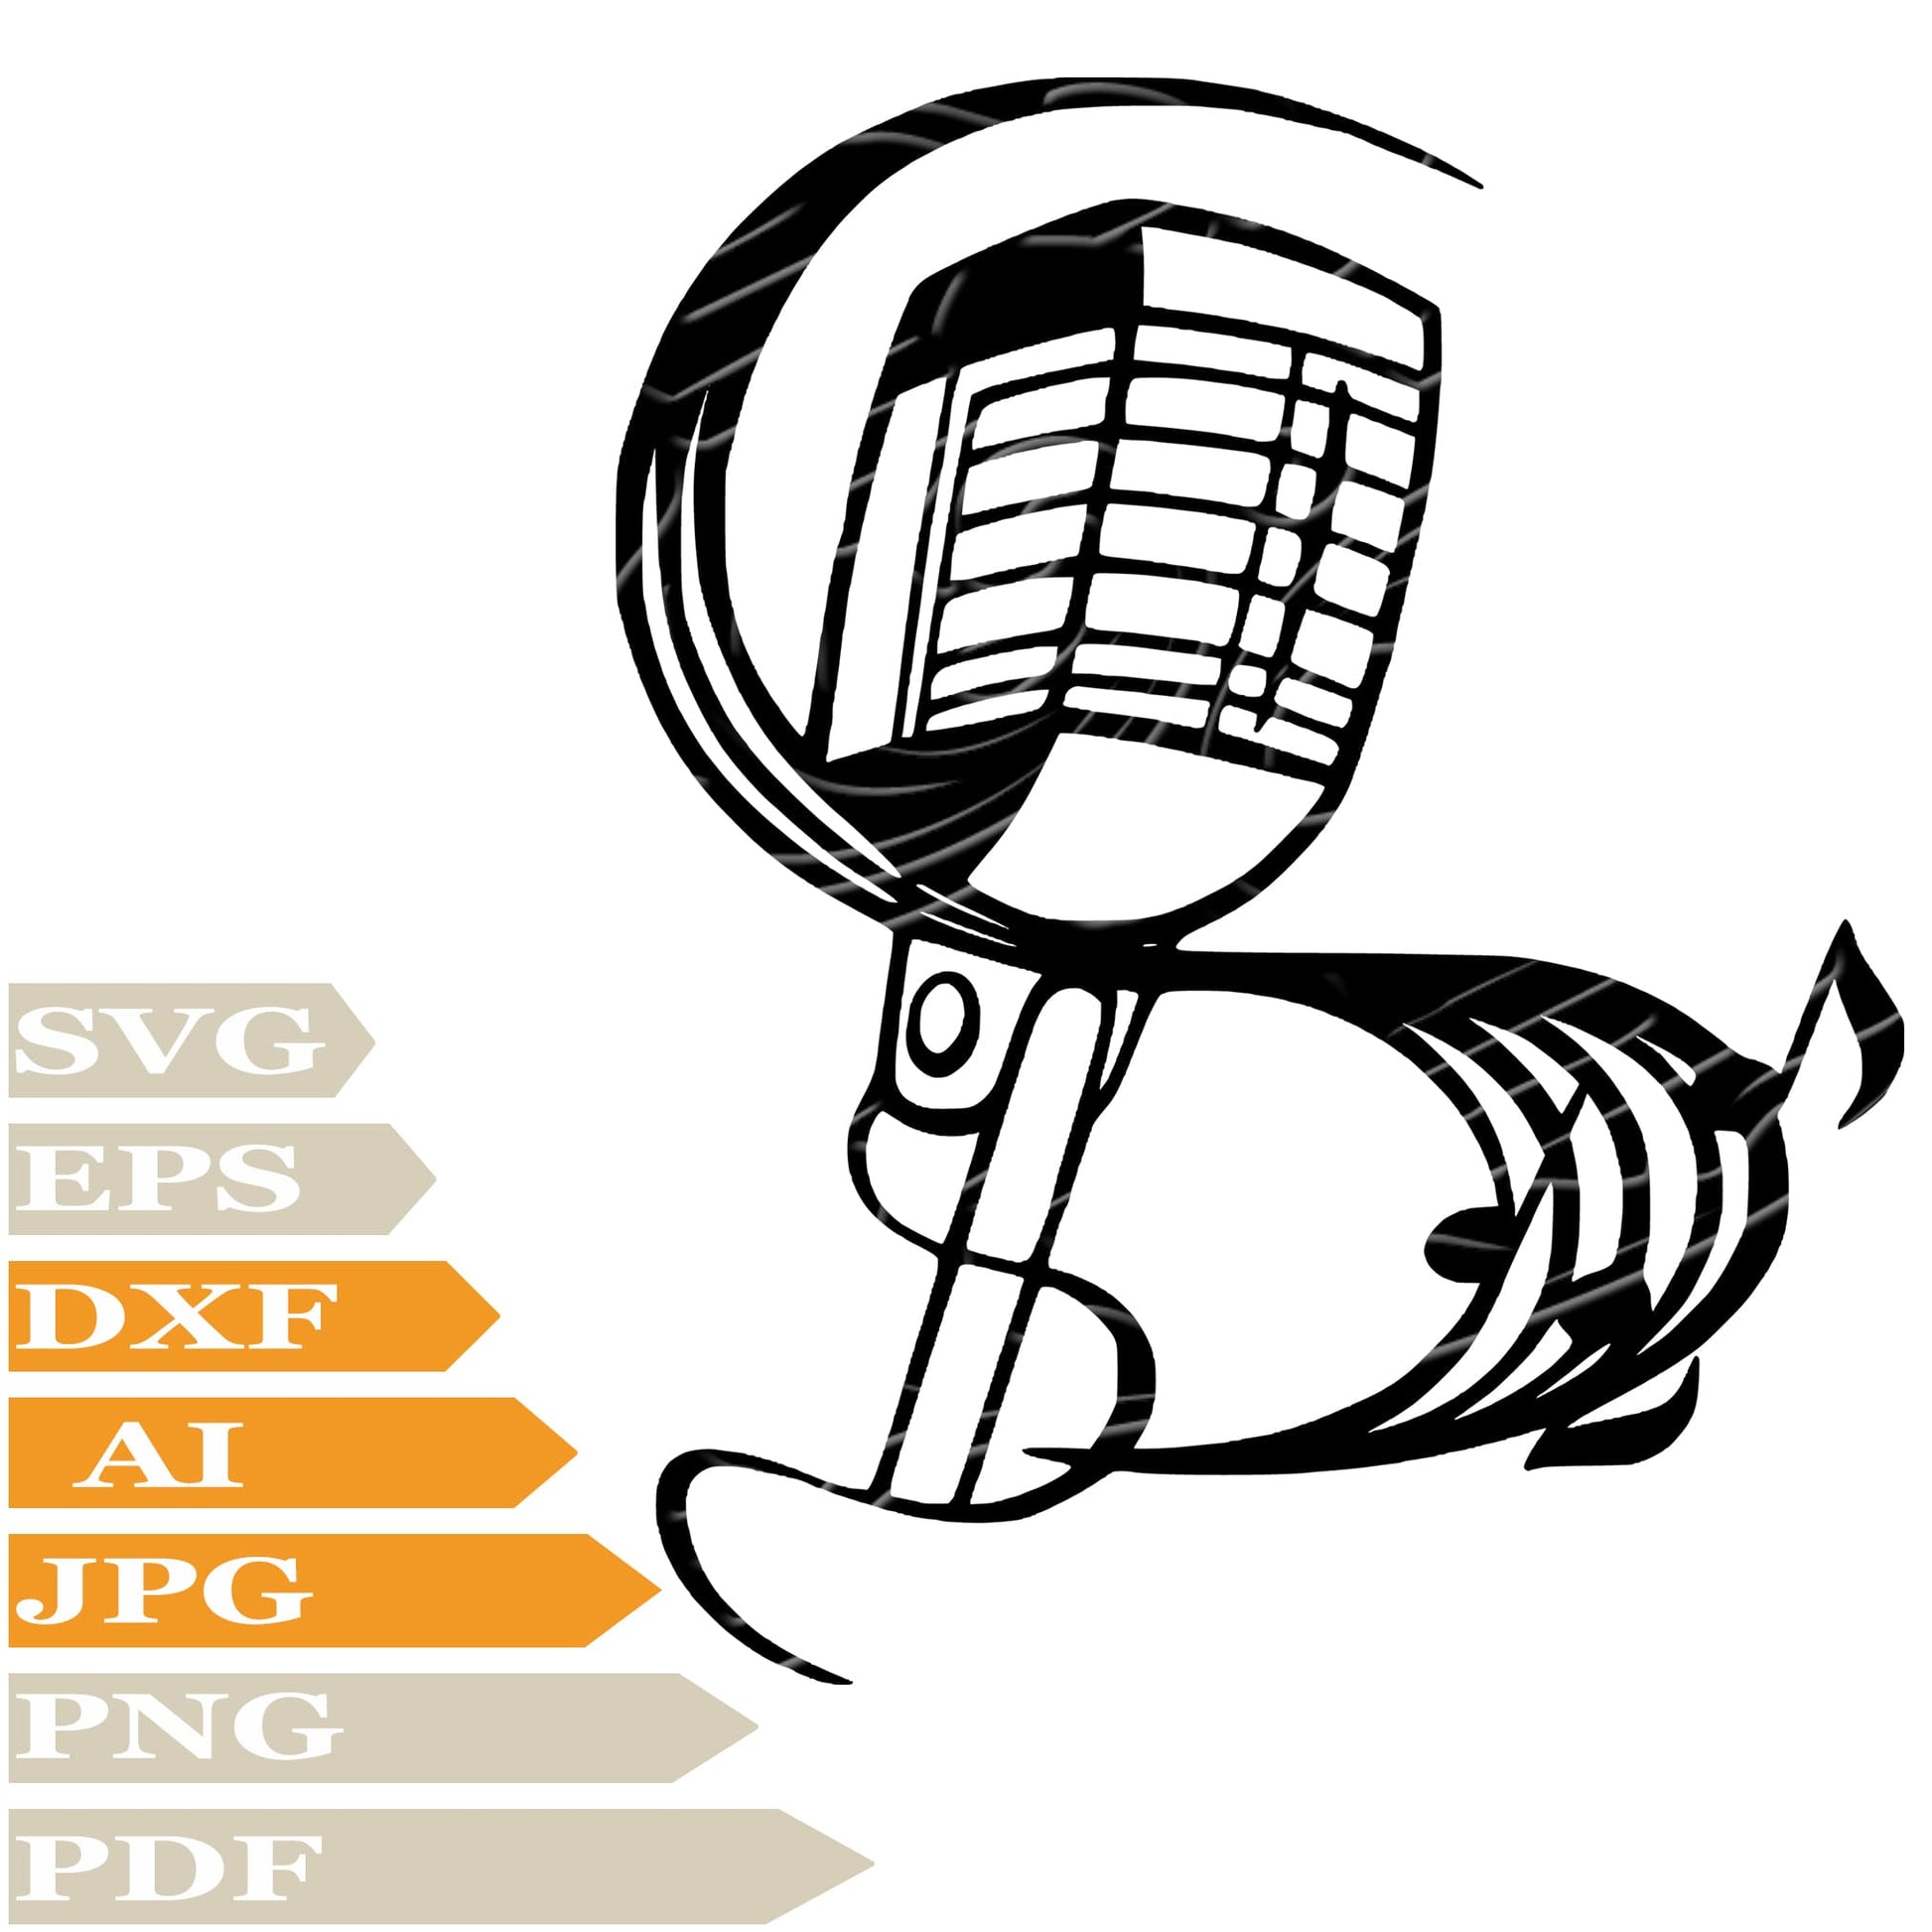 Microphone, Retro Microphone With Music Notes Svg File, Image Cut, Png, For Tattoo, Silhouette, Digital Vector Download, Cut File, Clipart, For Cricut